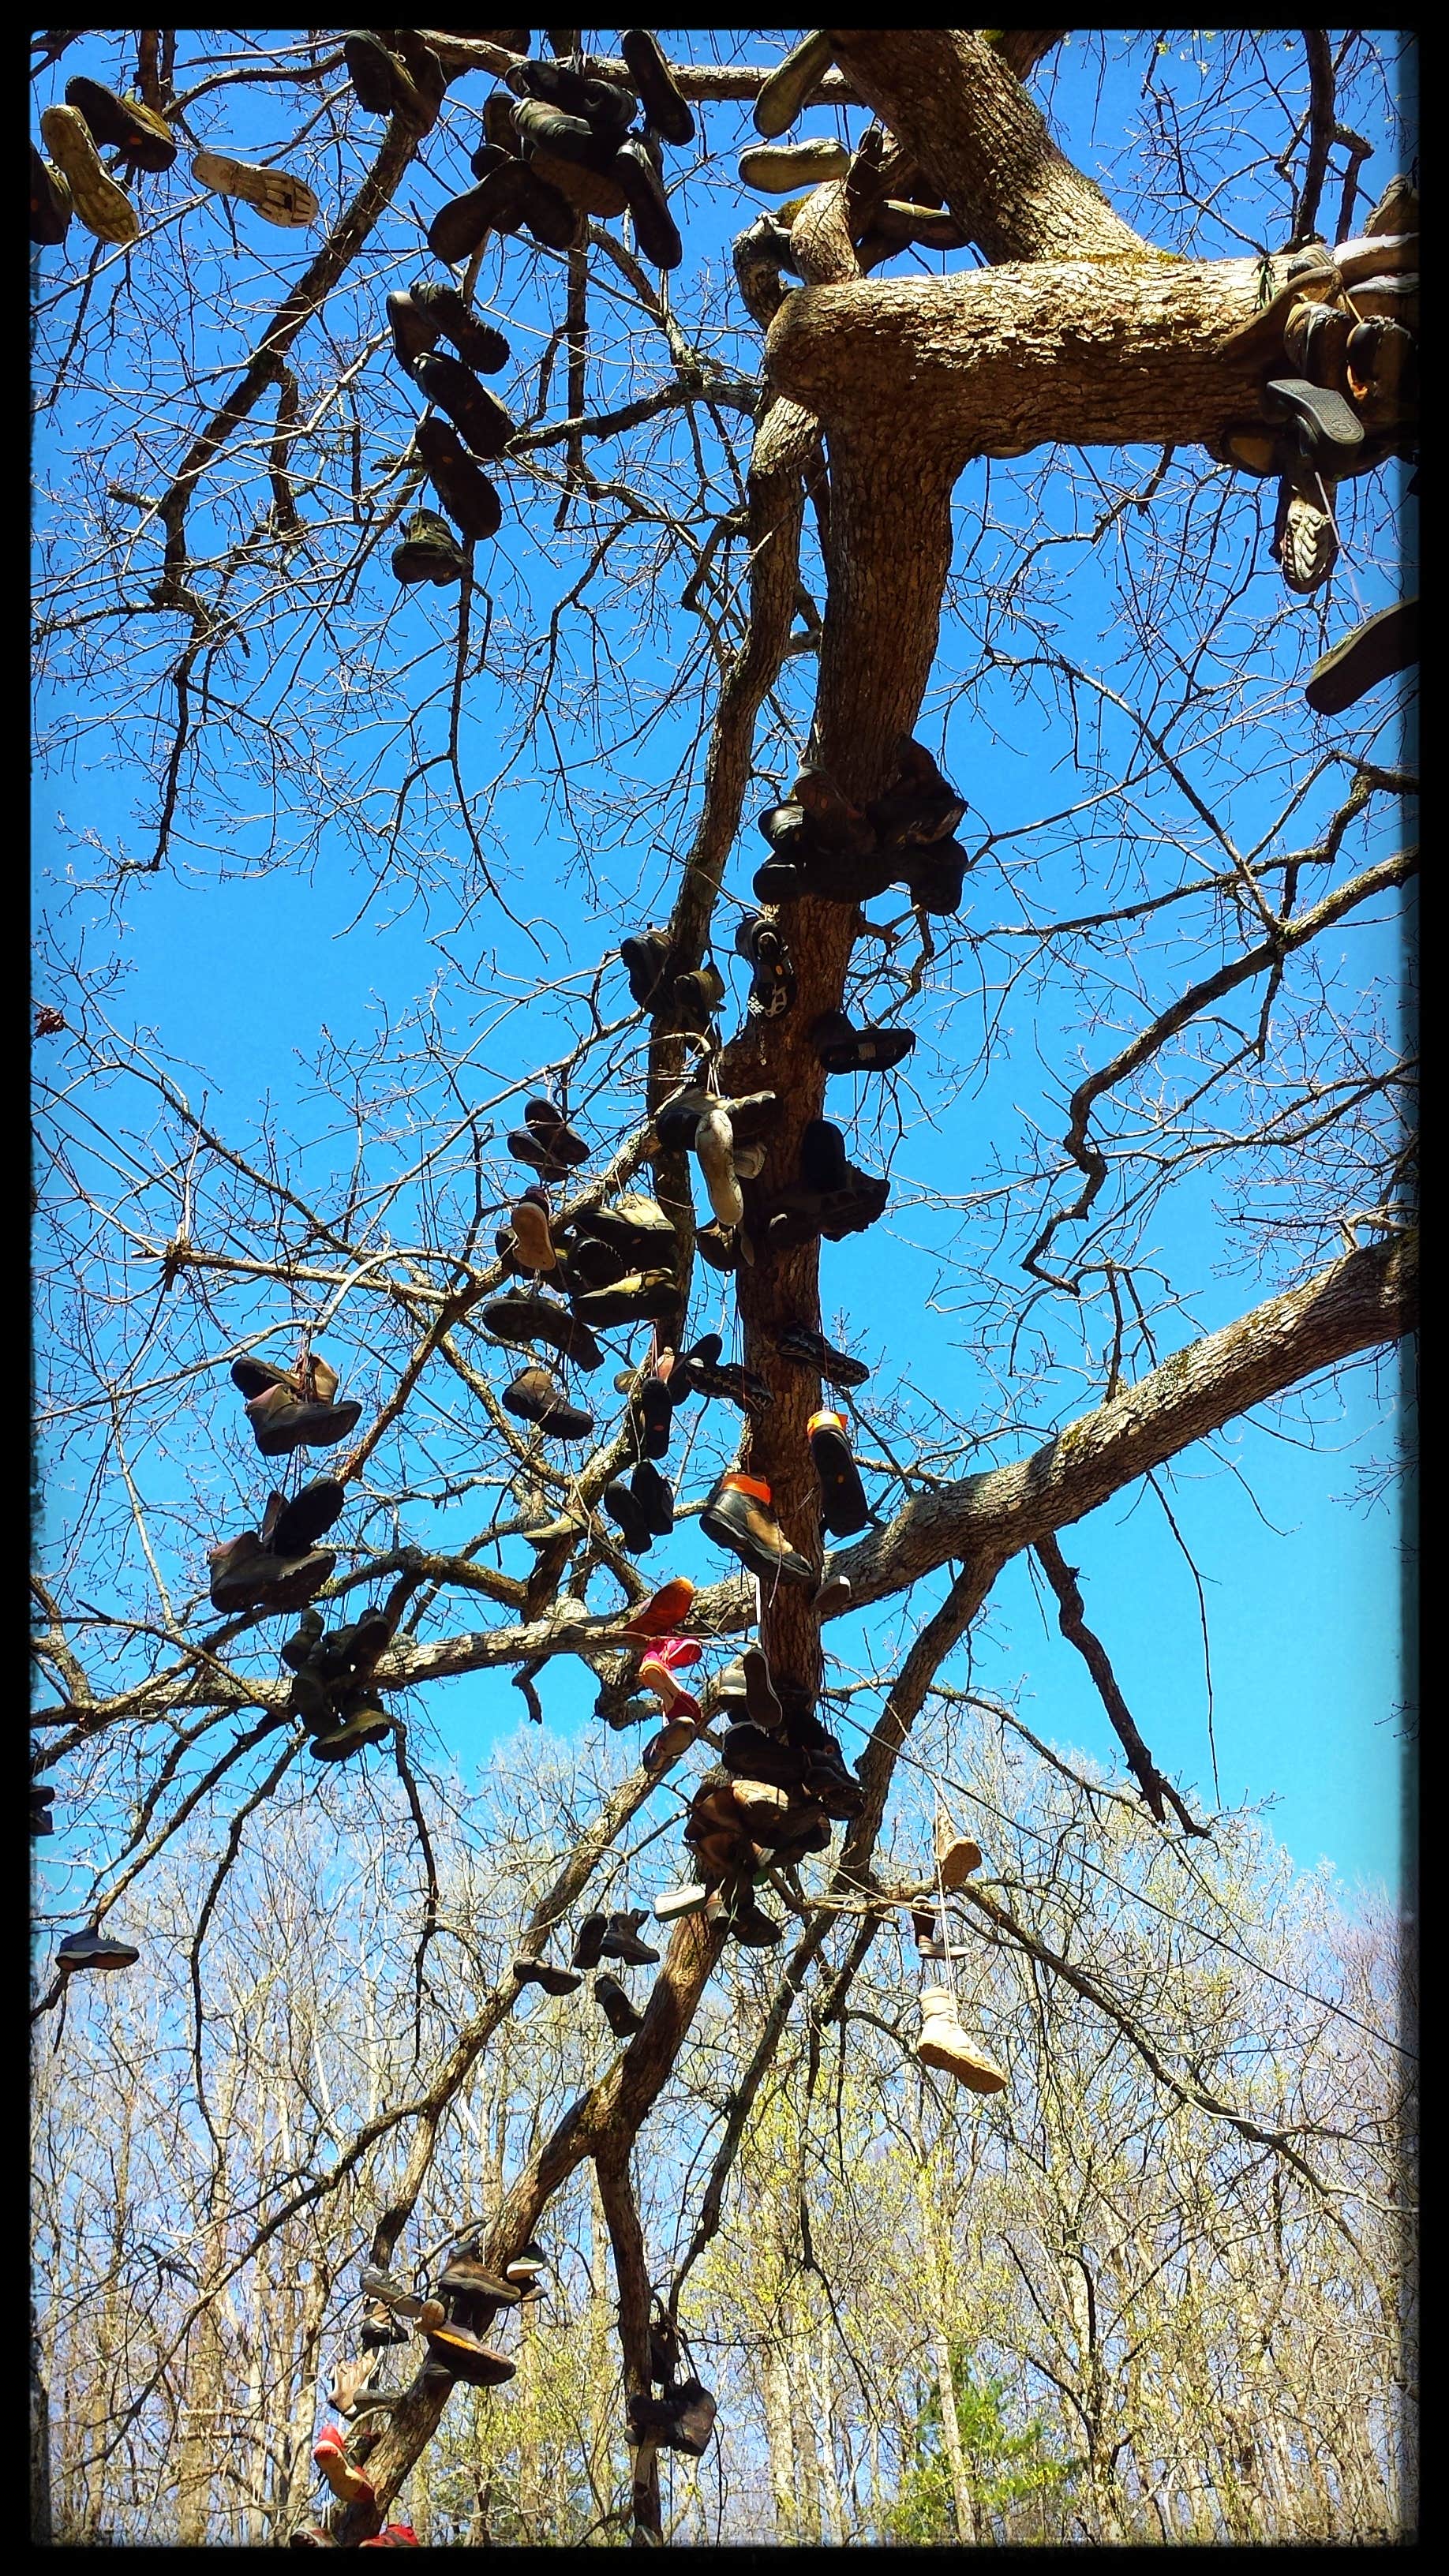 It's apparently tradition for hikers to chuck their boots and shoes into this tree!  Great photo op :)